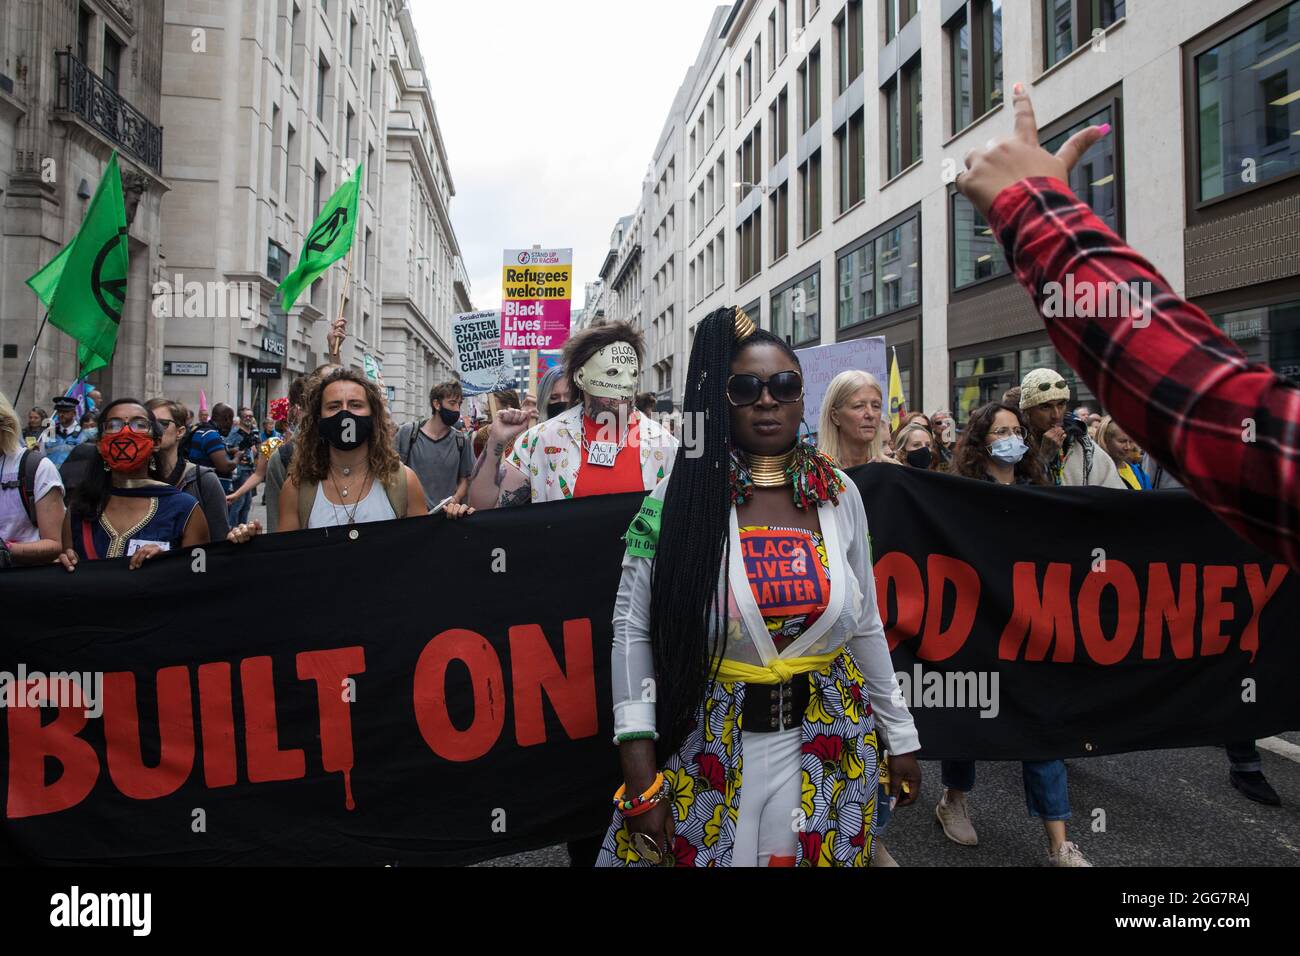 London, UK. 27th August, 2021. Marvina Newton leads environmental activists from Extinction Rebellion on a Blood Money March through the City of London on the fifth day of Impossible Rebellion protests. Extinction Rebellion were intending to highlight financial institutions funding fossil fuel projects, especially in the Global South, as well as law firms and institutions which facilitate them, whilst calling on the UK government to cease all new fossil fuel investment with immediate effect. Credit: Mark Kerrison/Alamy Live News Stock Photo